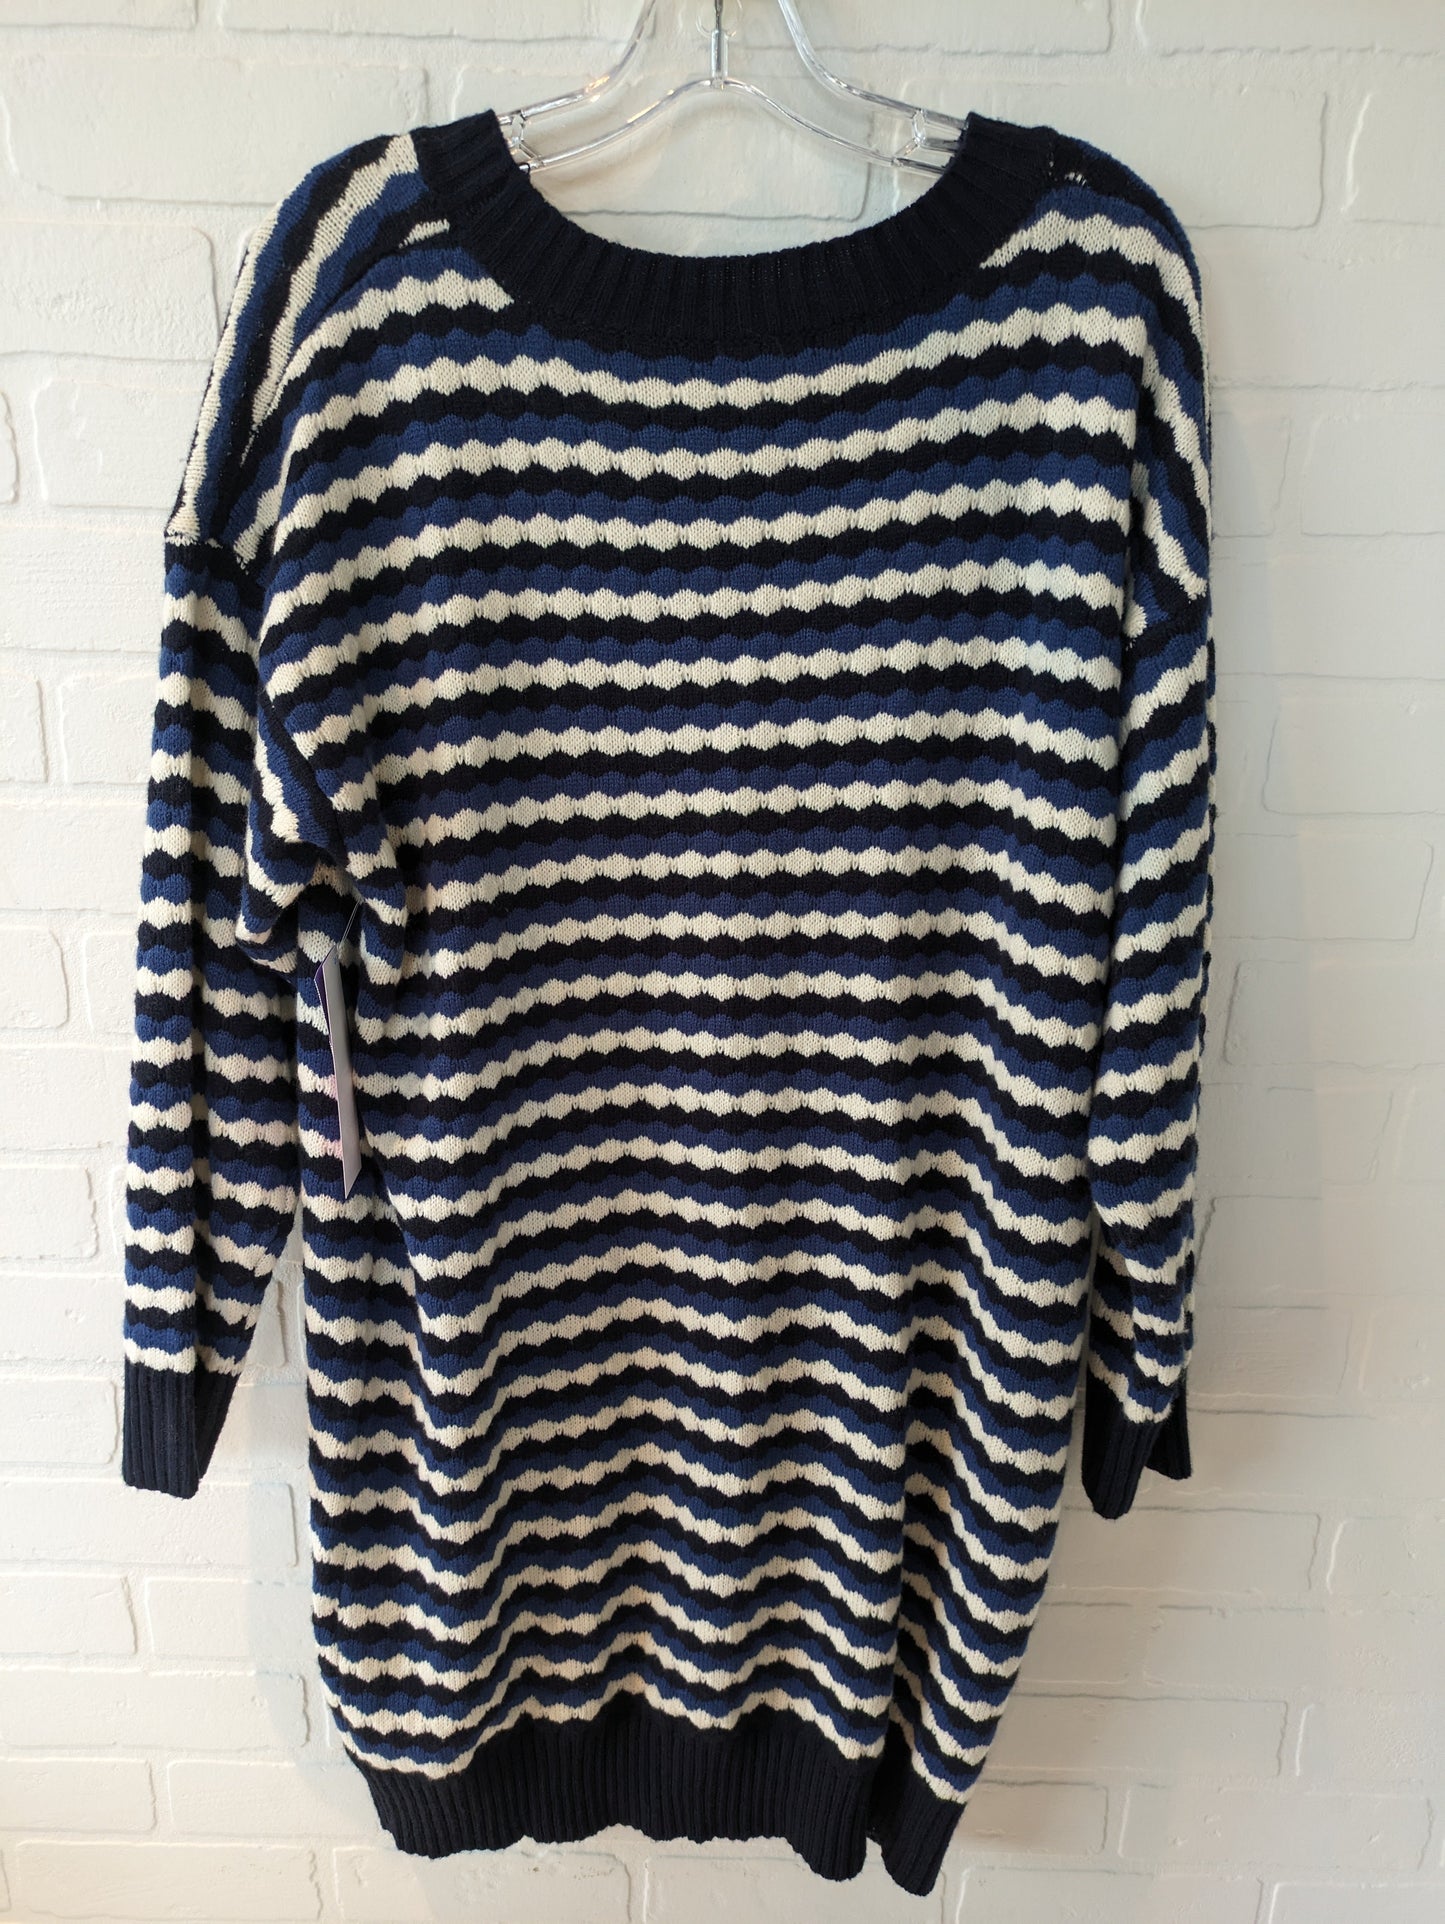 Dress Sweater By Papermoon  Size: L